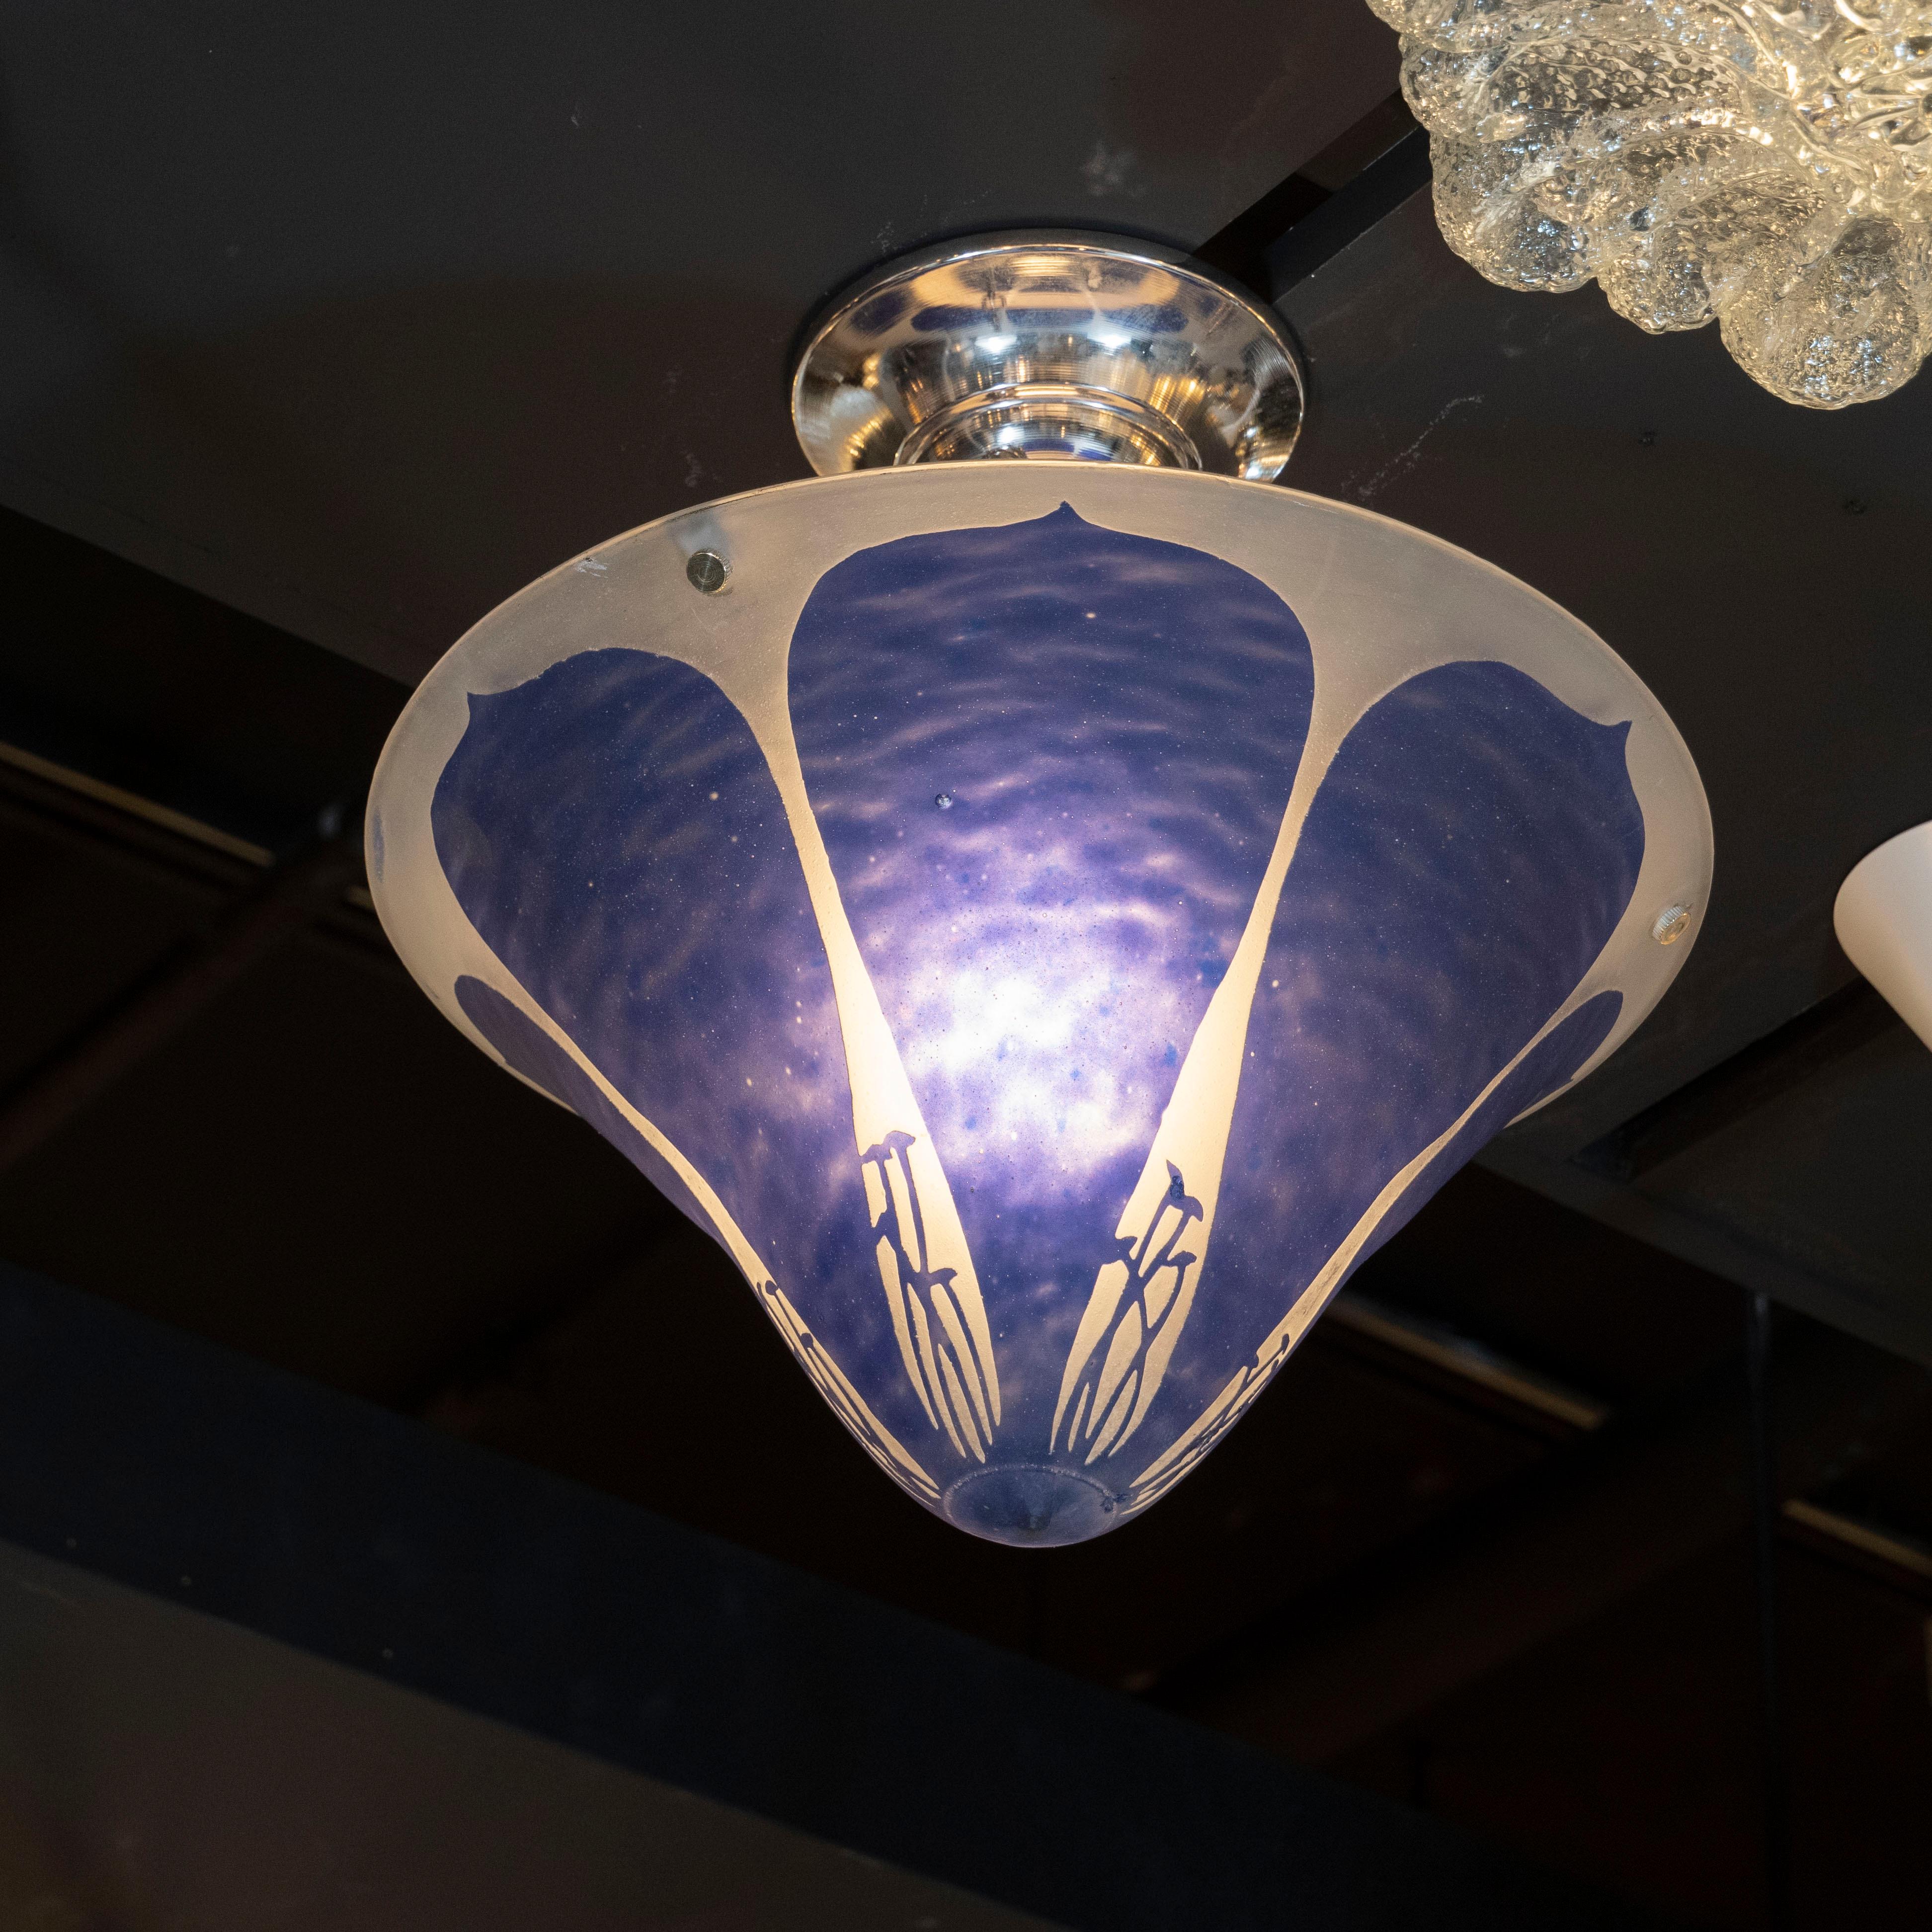 This elegant Art Deco chandelier was hand blown by the celebrated lighting studio Degué in France, circa 1925. Equally stunning from all angles, the chandelier features a conical shape resembling a pitched mushroom cap with tear drop forms in